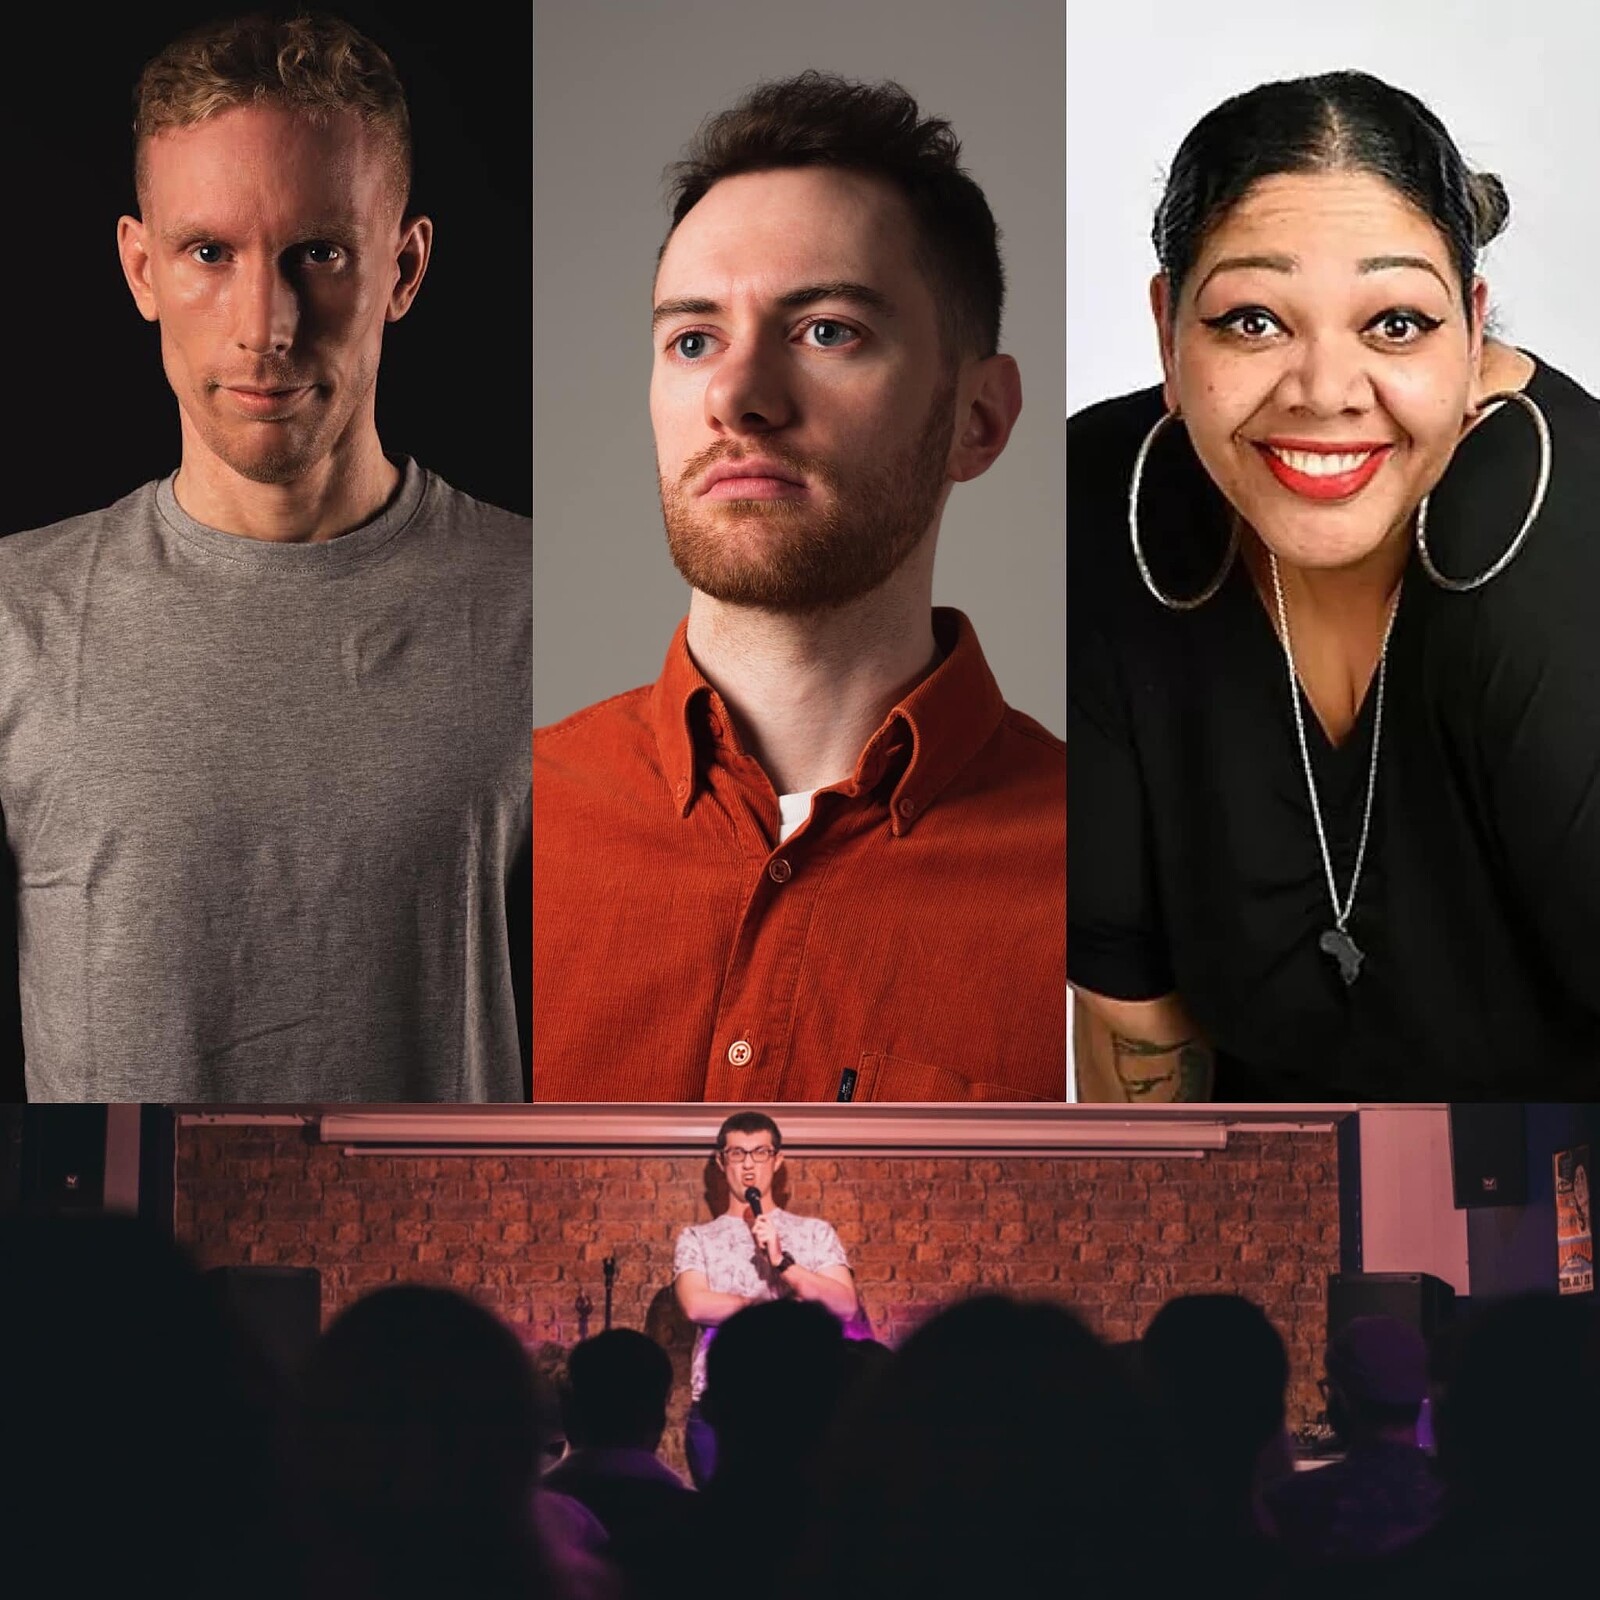 Bristol Comedy Den: Weekend Early Show at Sidney & Eden